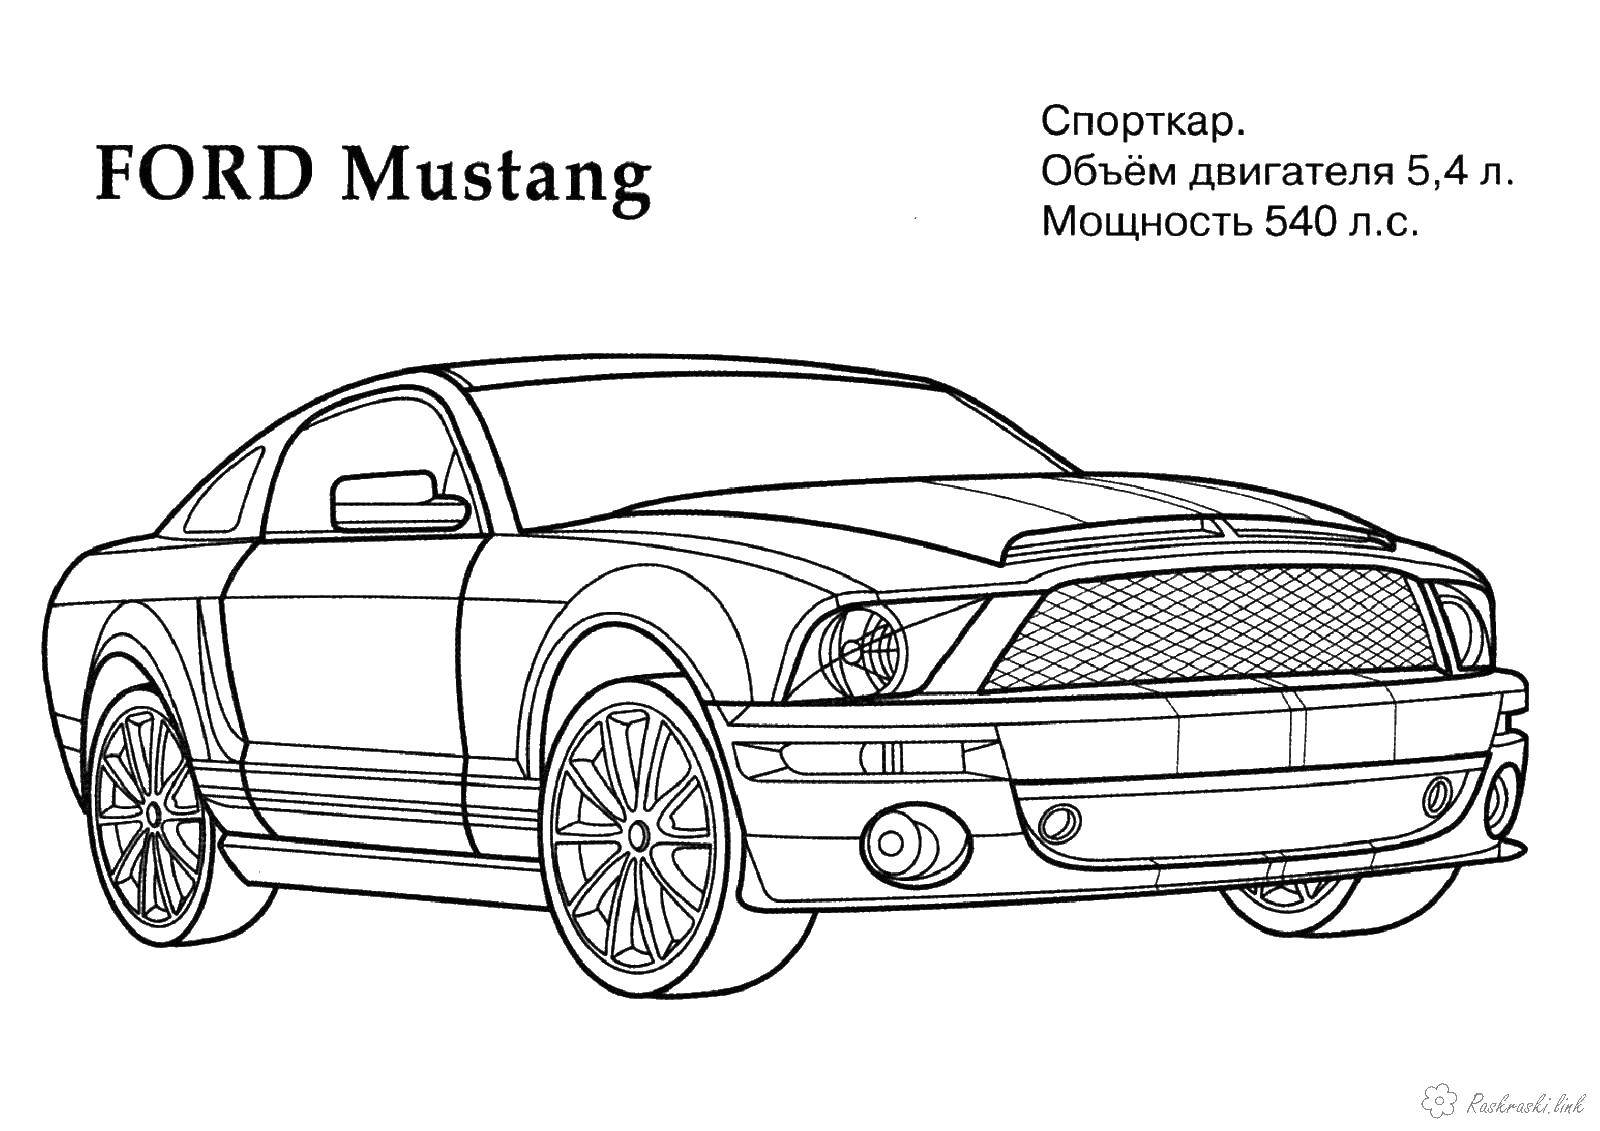 Coloring Sports car Ford Mustang. Category Machine . Tags:  machine , sports car, Mustang.